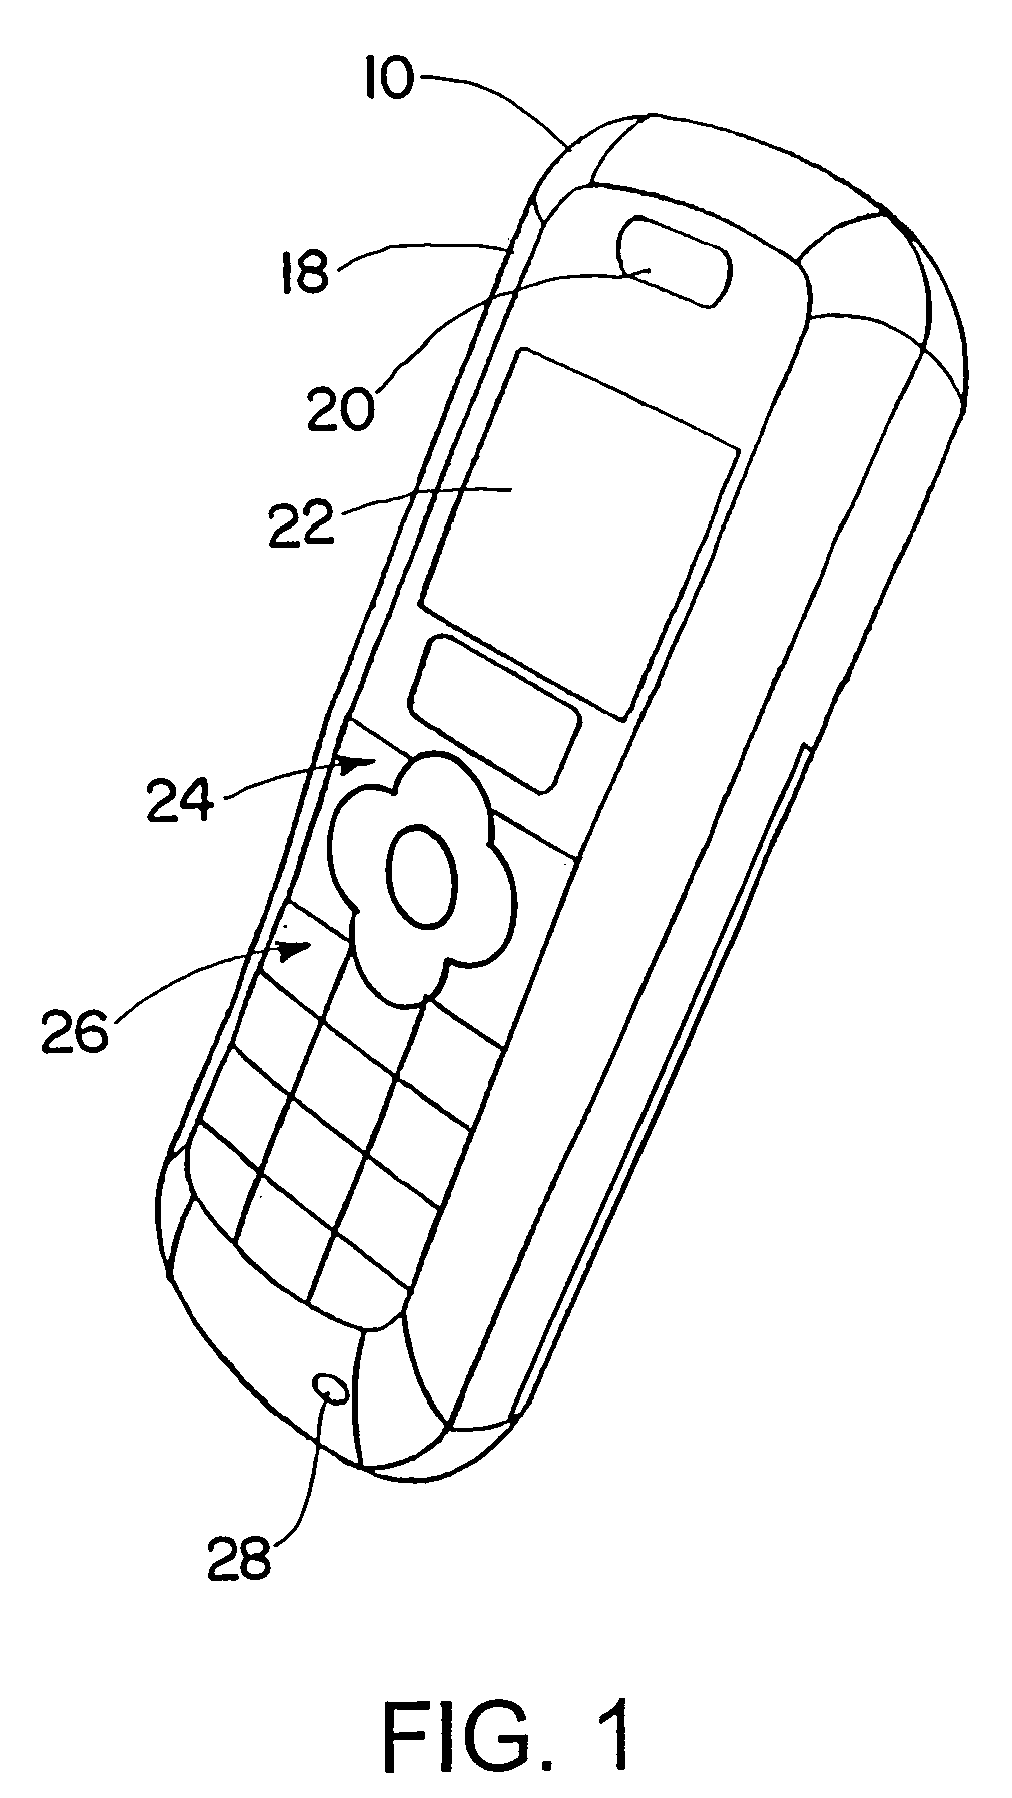 External heat sink for electronic device